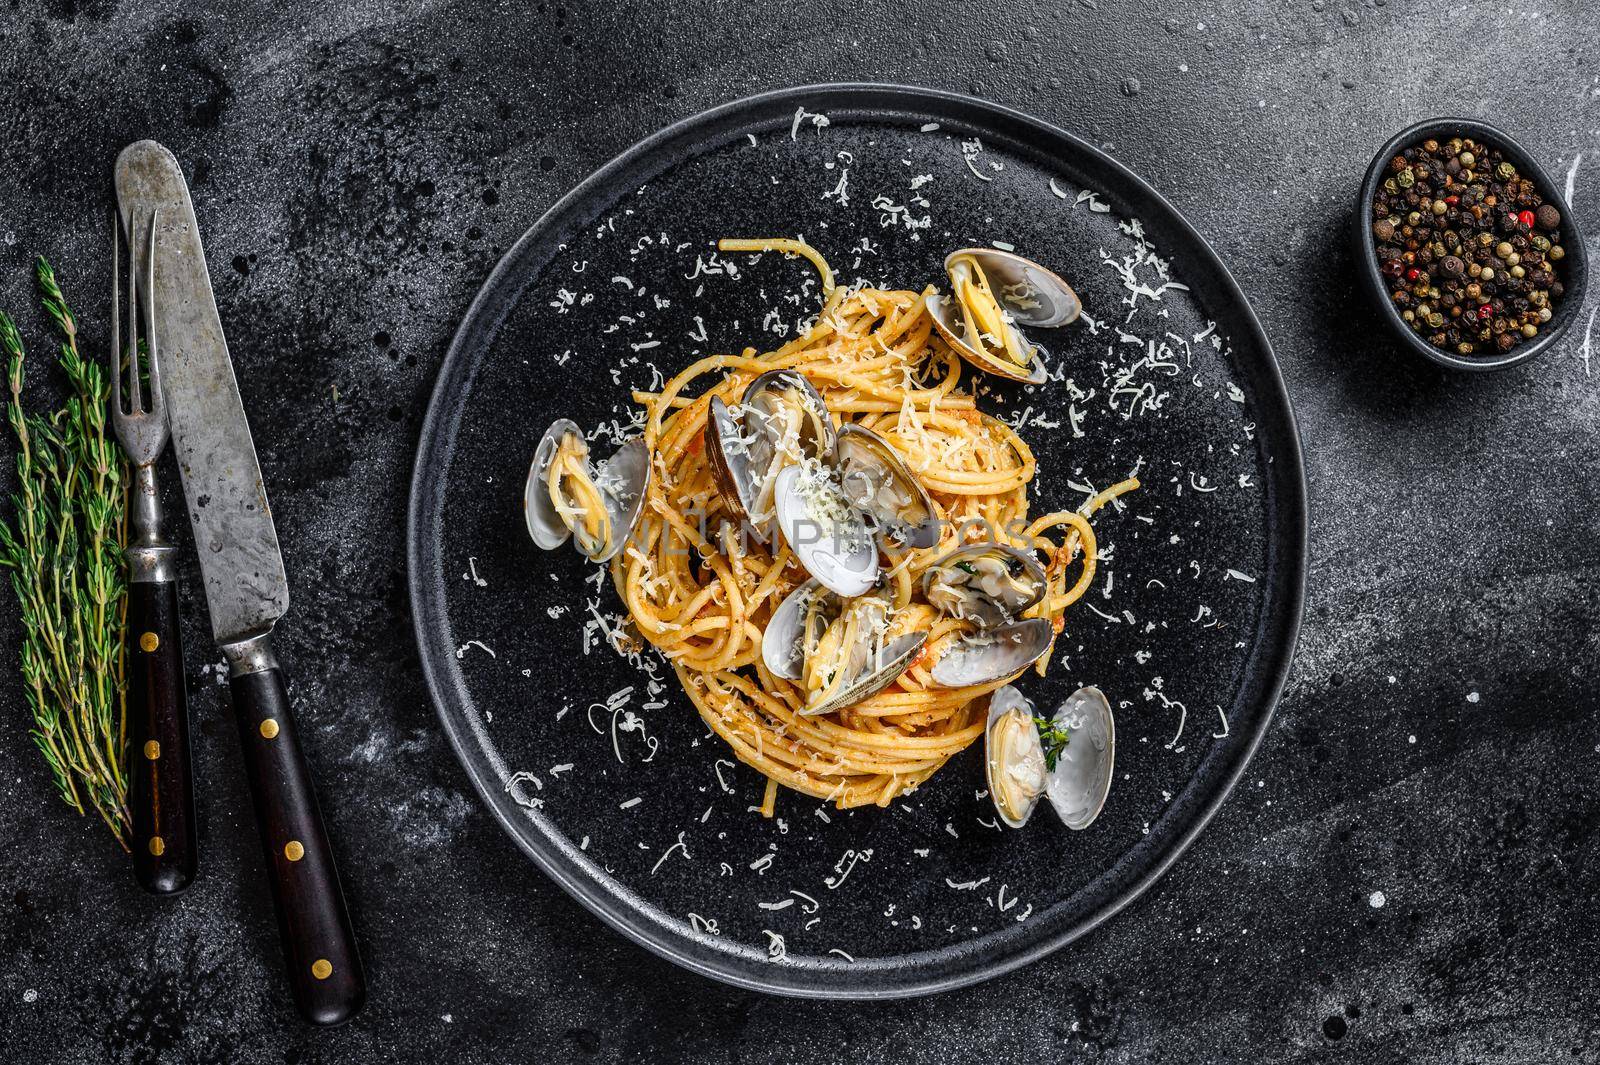 Seafood Spaghetti pasta with Clams vongole in a plate. Black background. Top view.